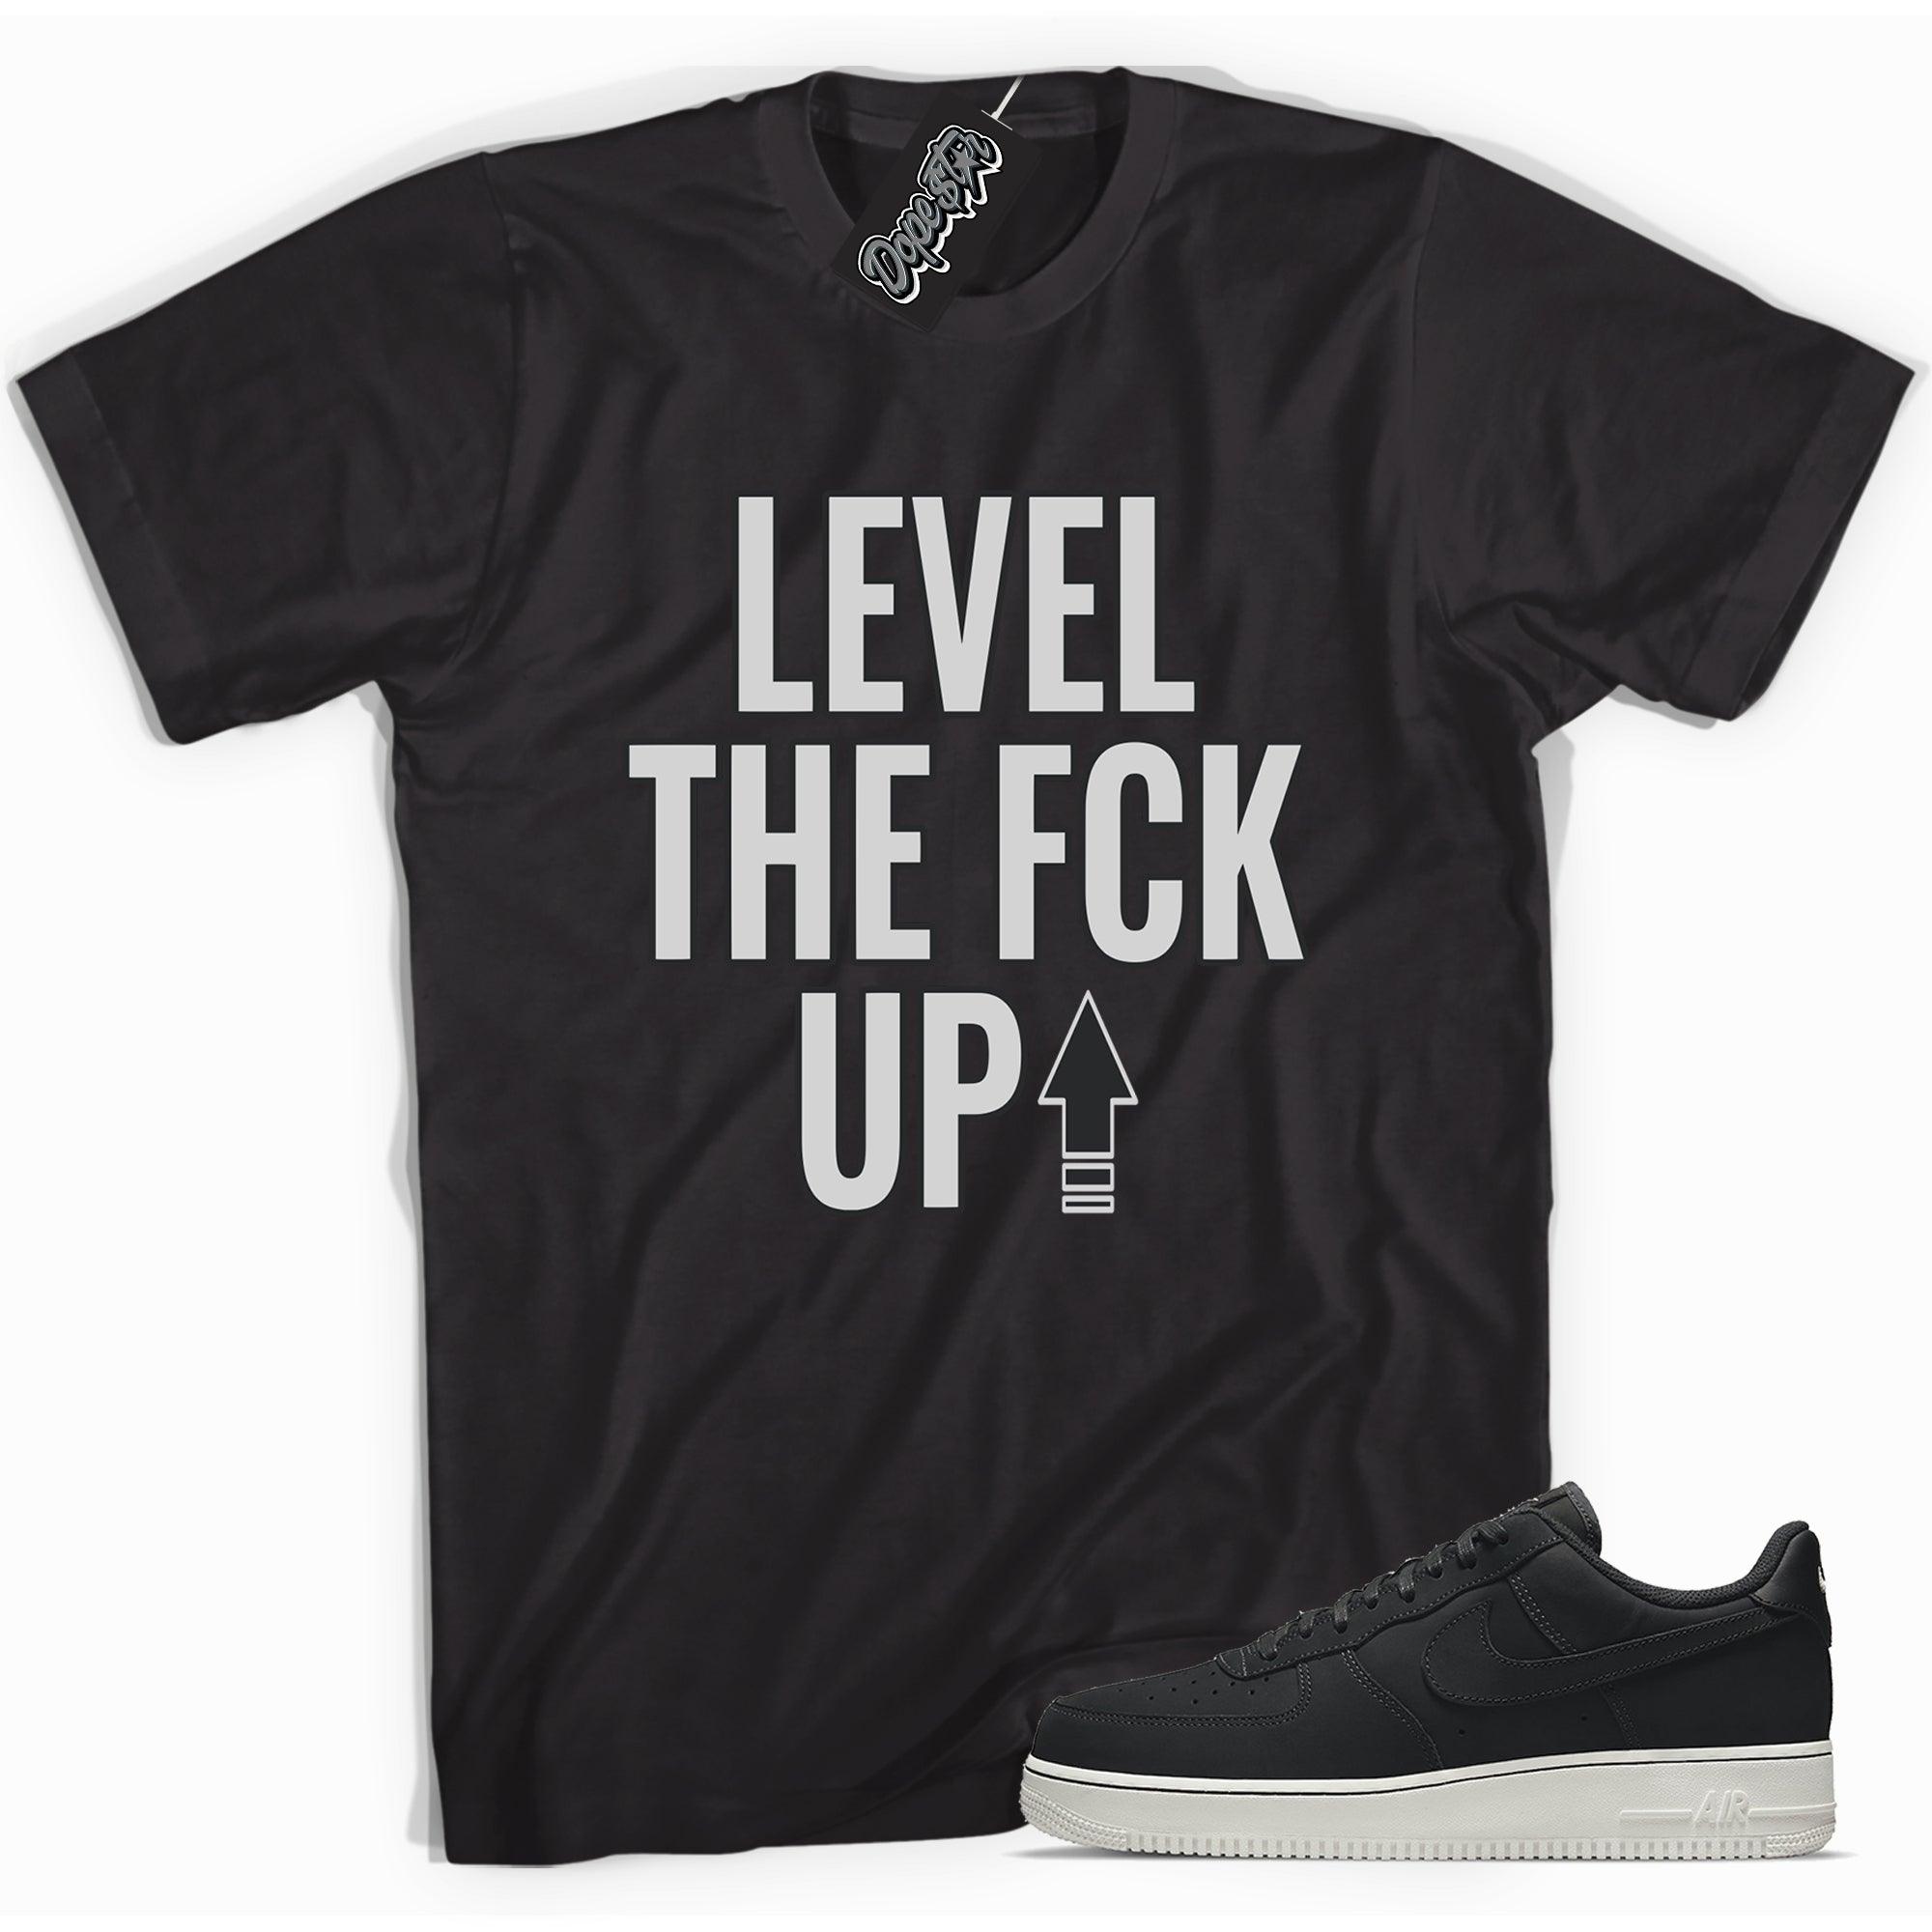 Cool black graphic tee with 'level up' print, that perfectly matches Nike Air Force 1 Low LX Off Noir Black sneakers.